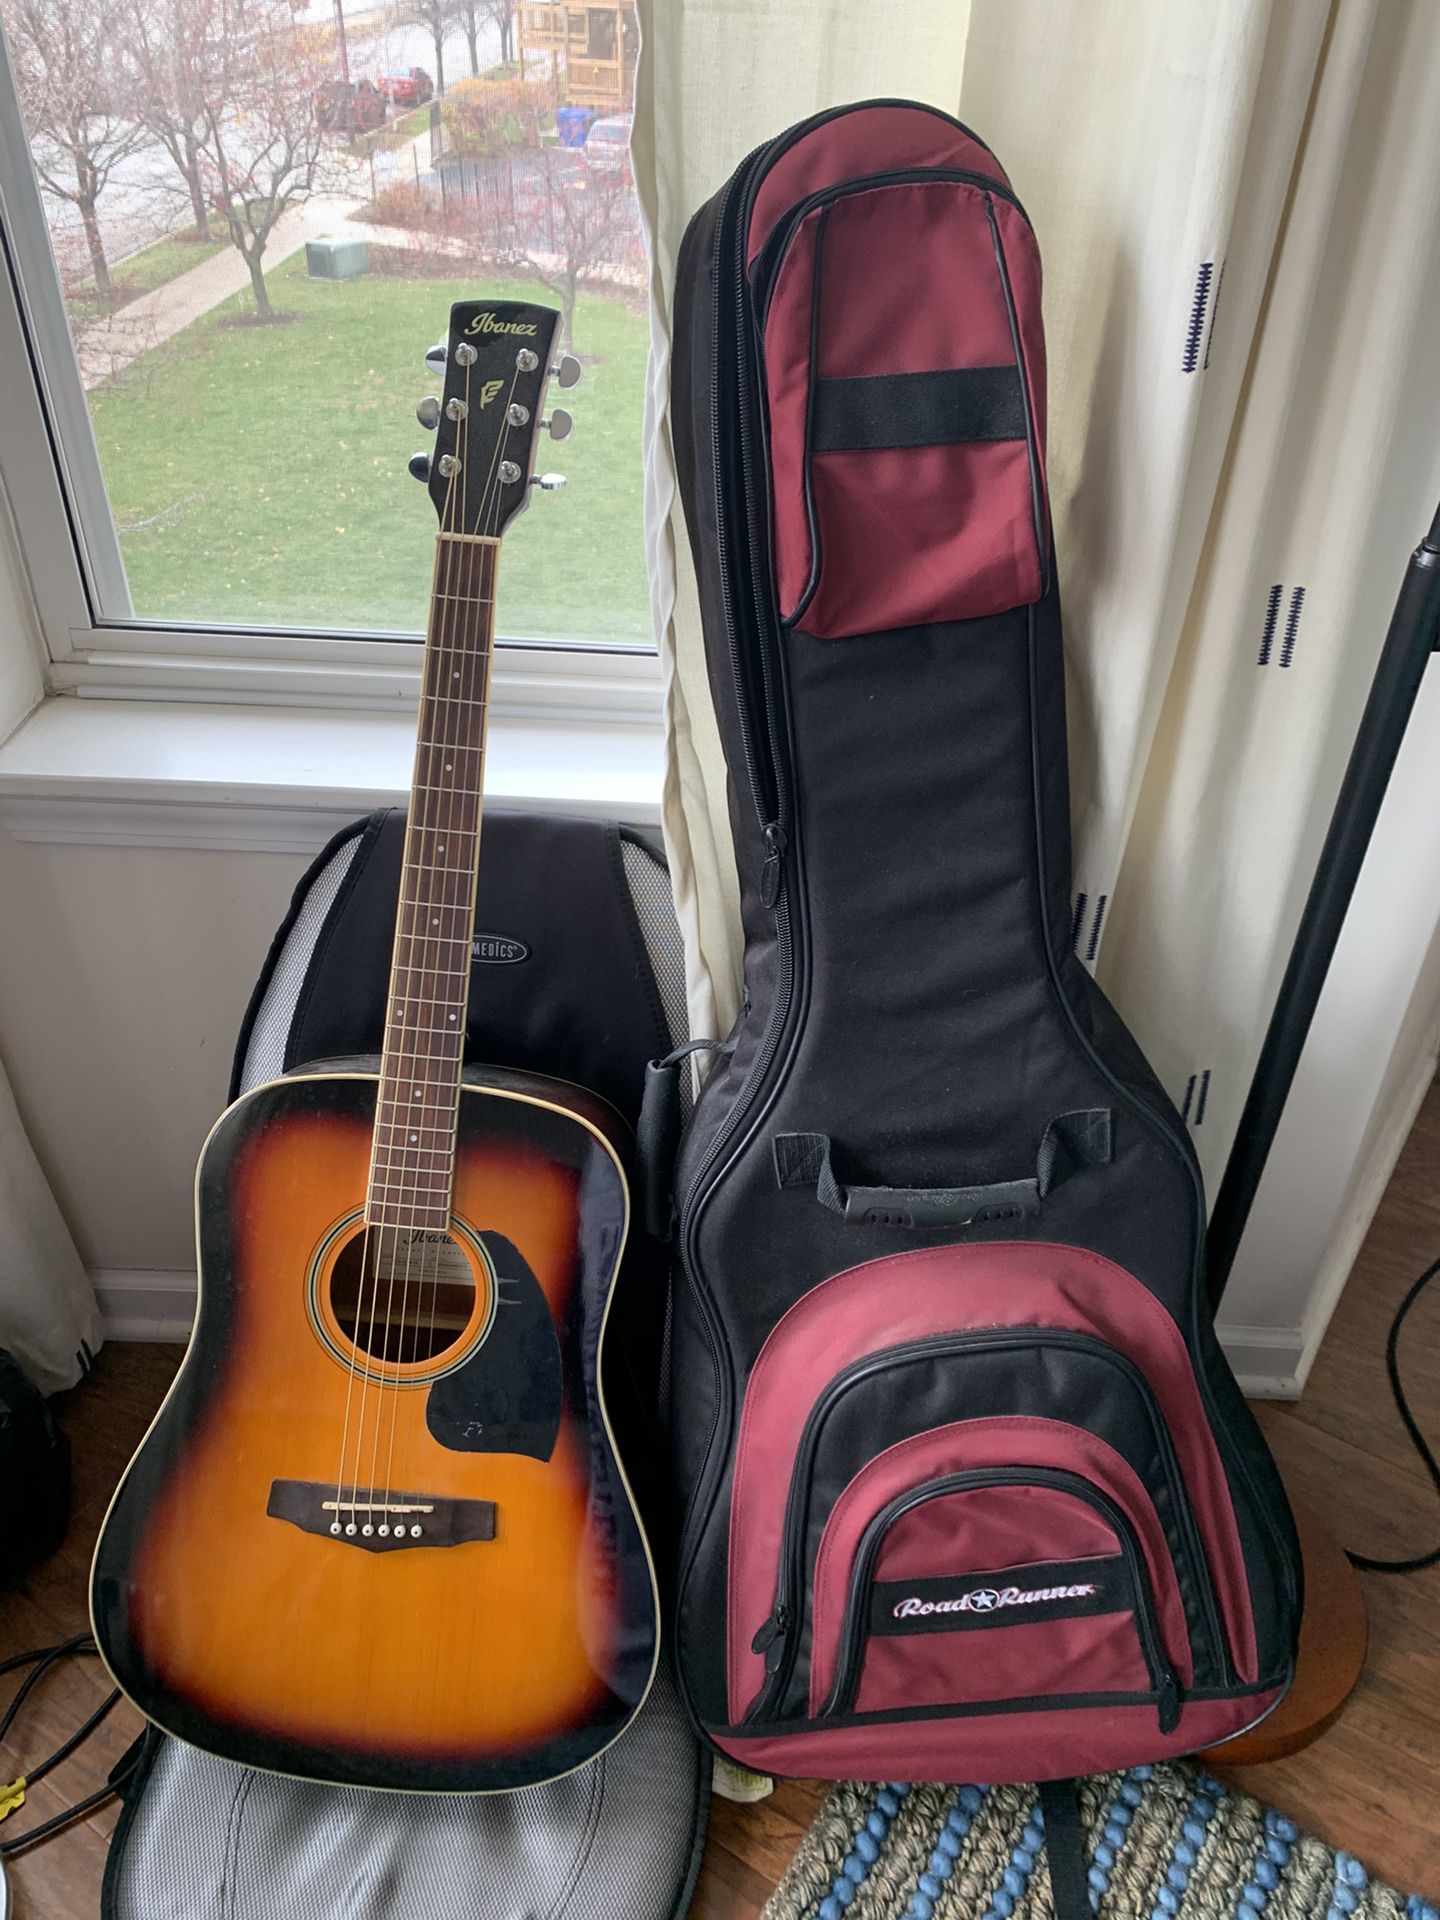 Ibanez Acoustic Guitar, Cover, Stand, And Capo - Barely Used